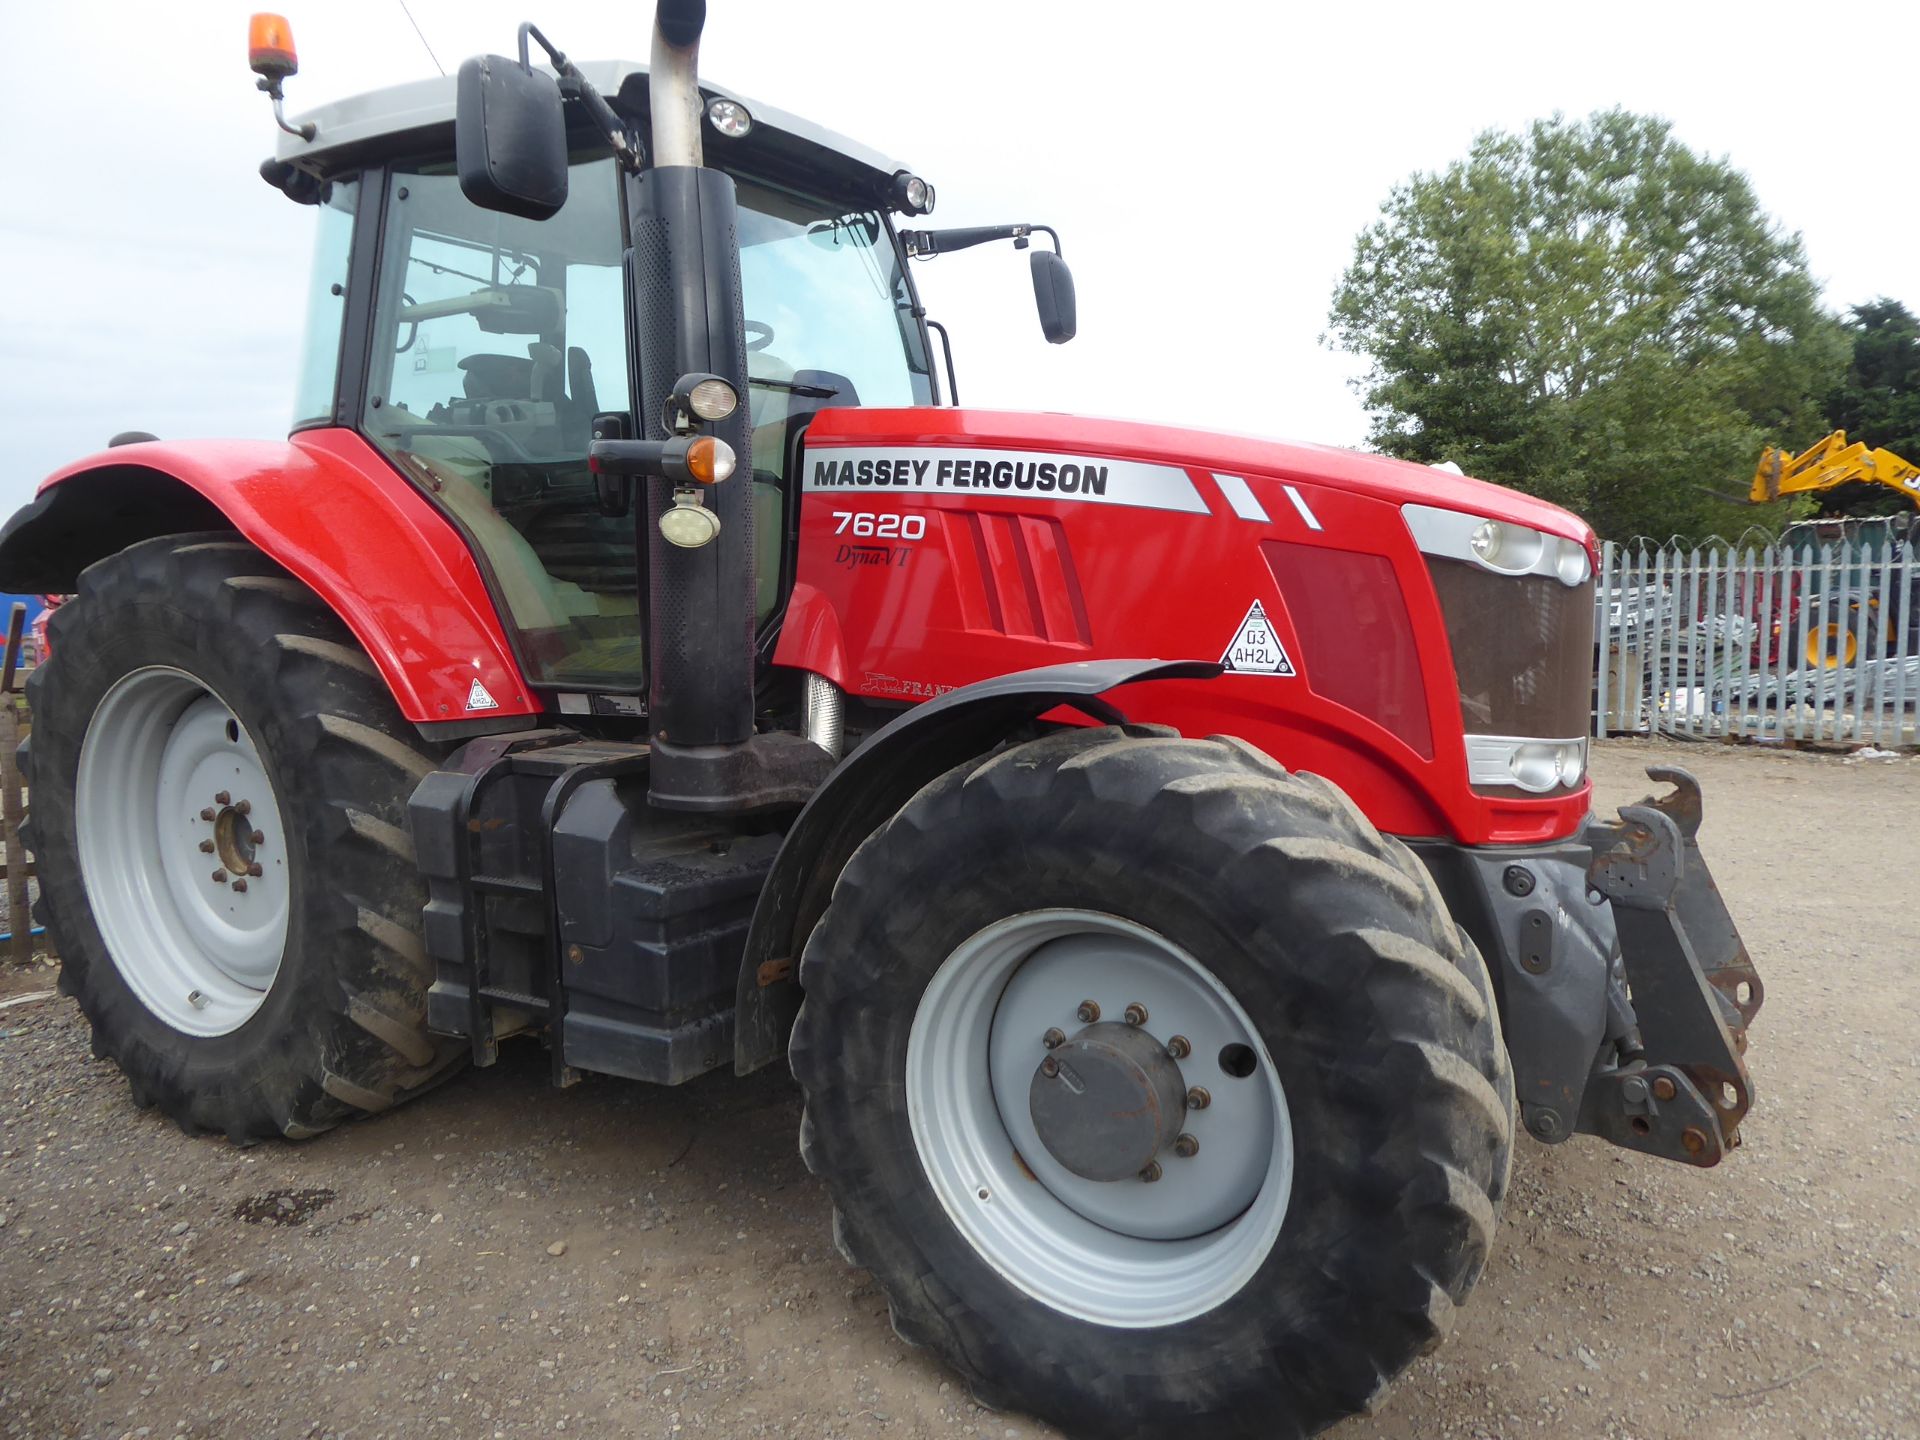 Massey Ferguson 7620 Exclusive 4wd tractor c/w VT gearbox, 150ltr/min hydraulic pump, 4T front - Image 2 of 5